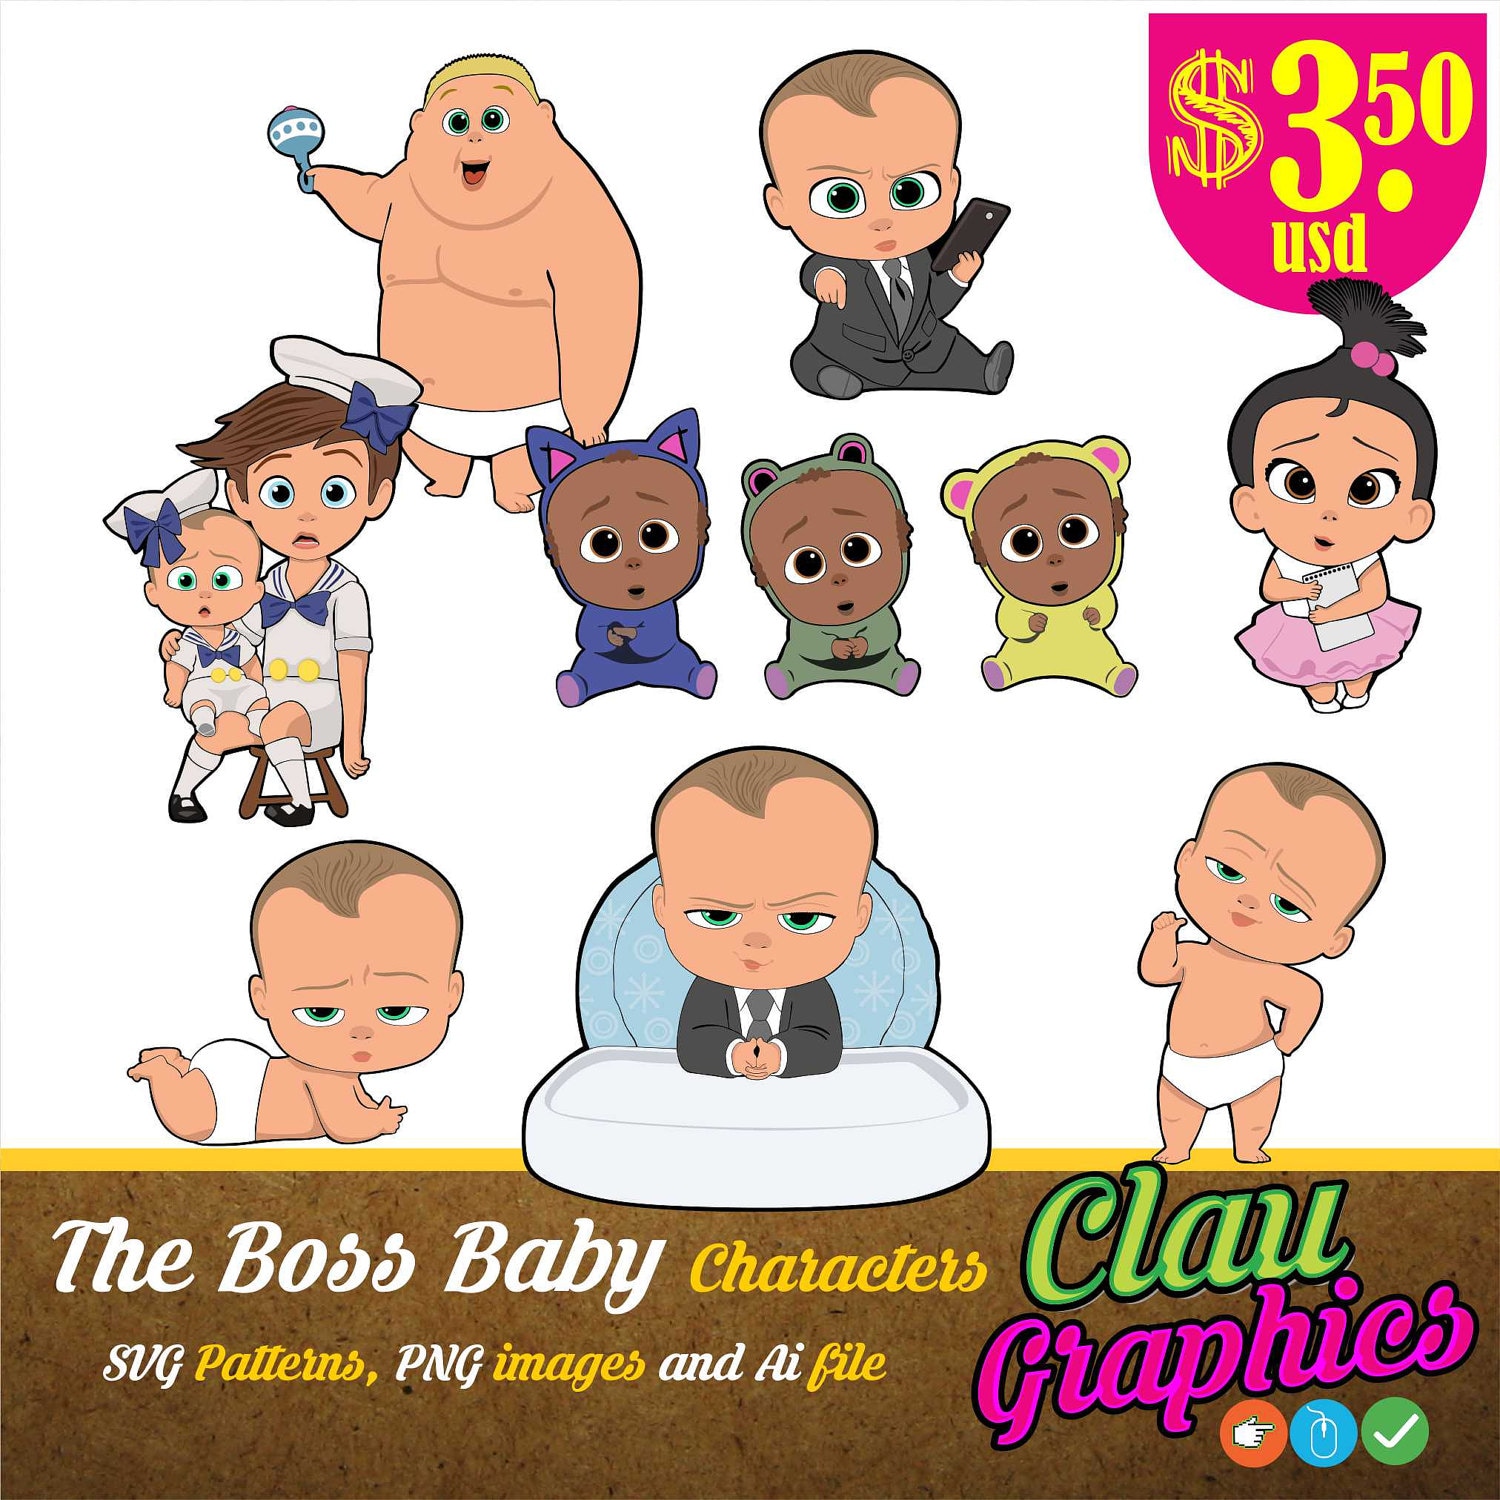 Download The Boss Baby Movie clipart Digital Illustrations on editable